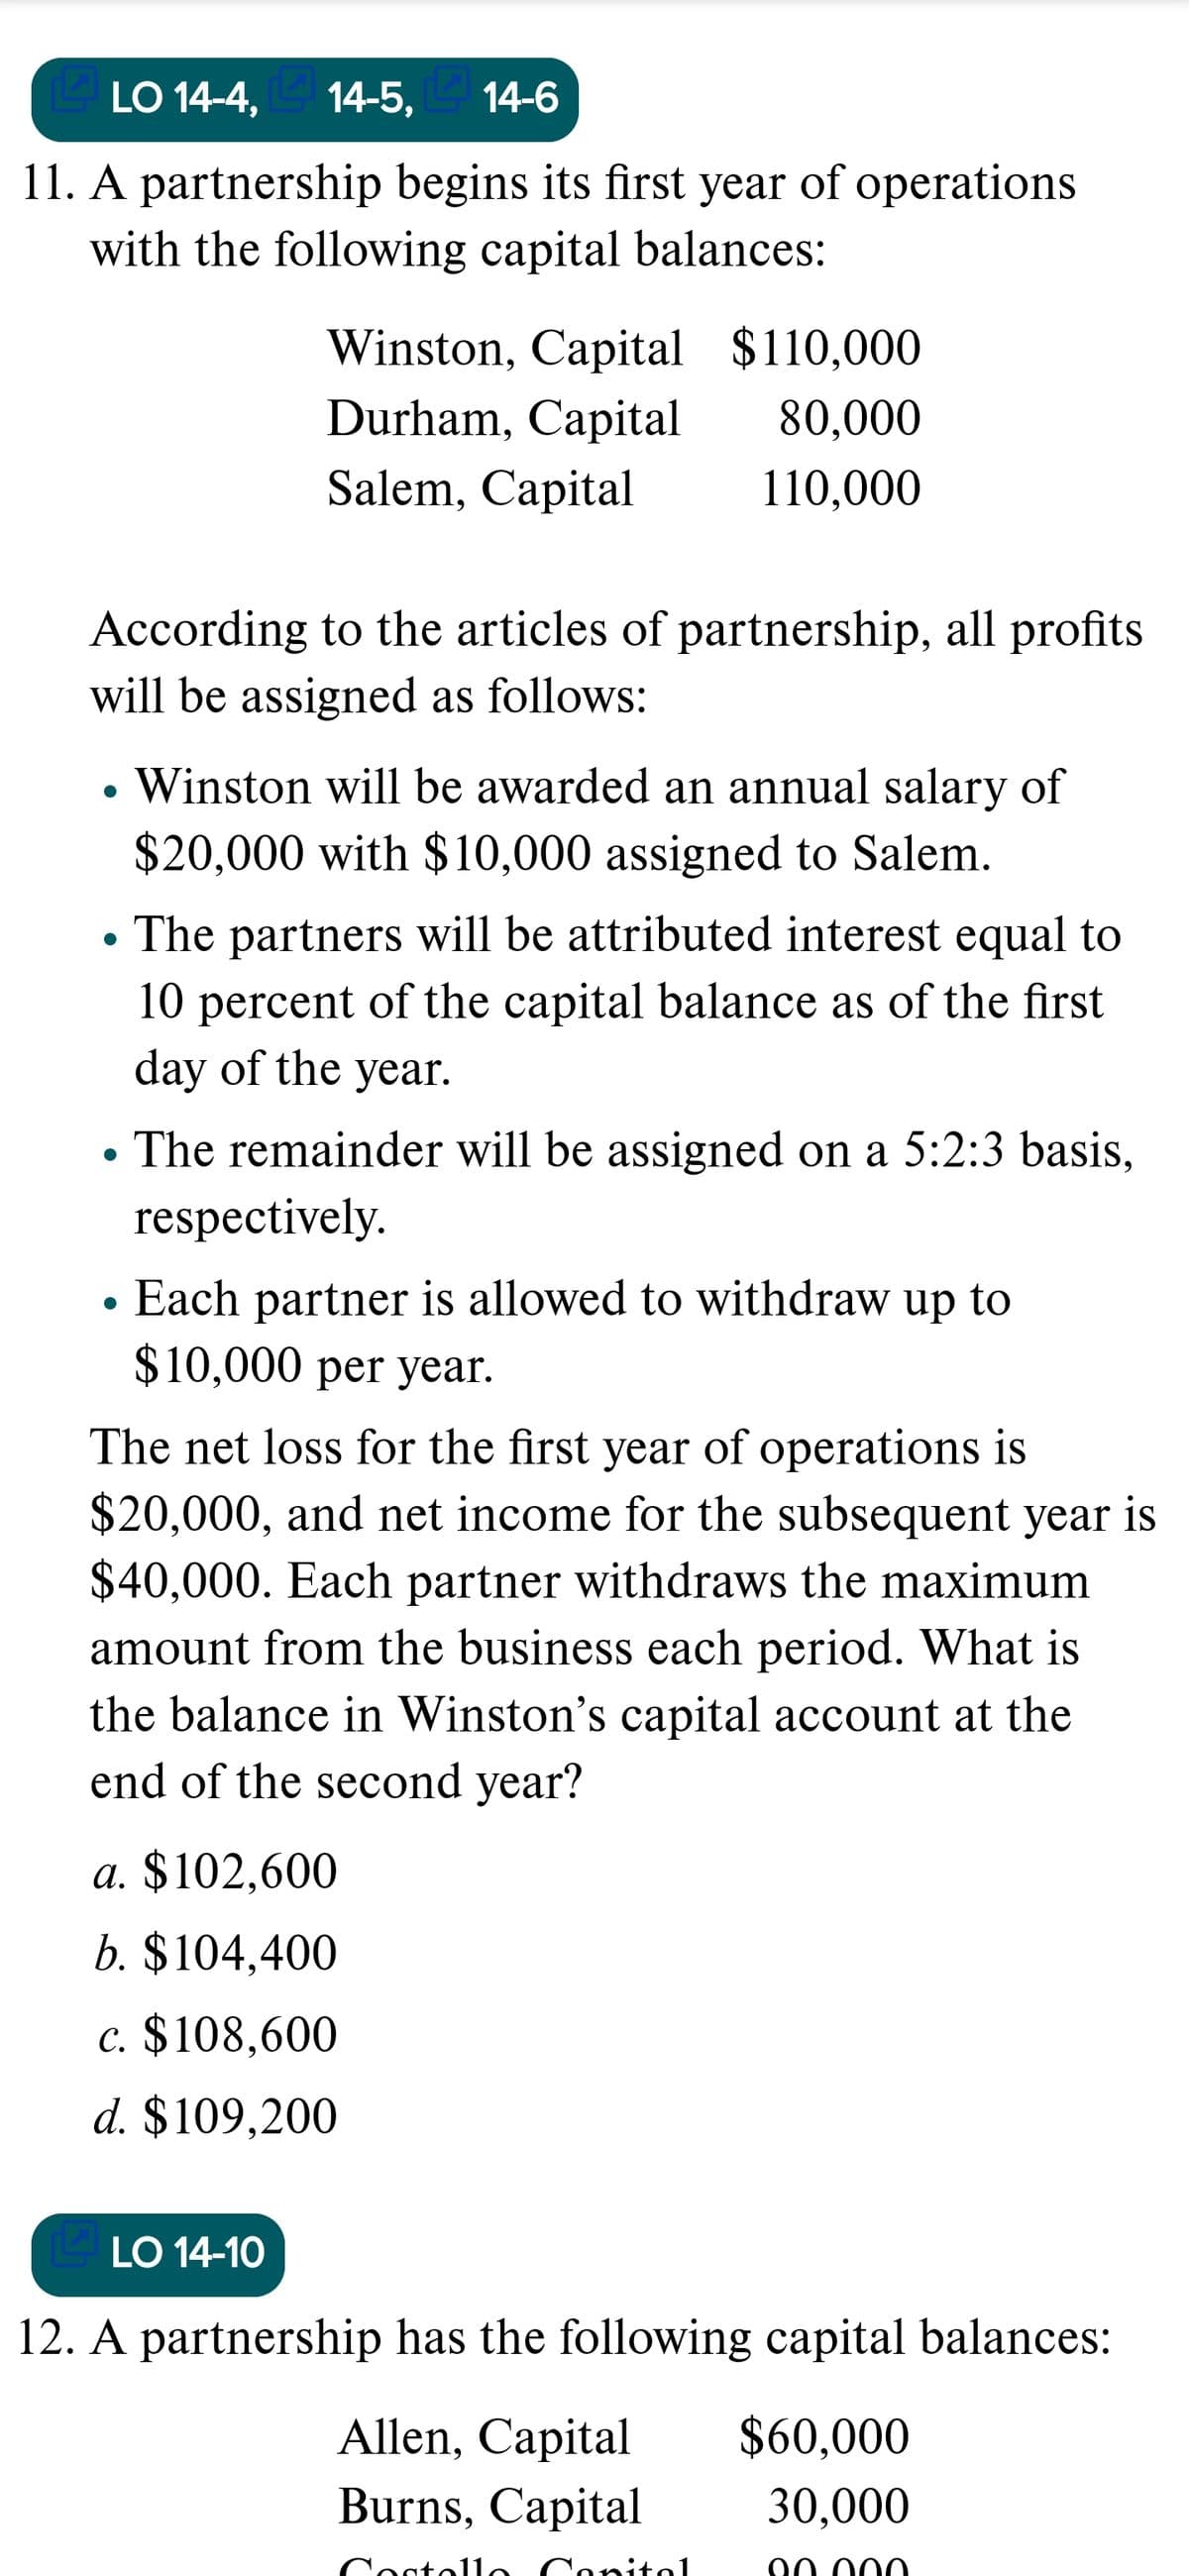 LO 14-4,
14-5,
E 14-6
11. A partnership begins its first year of operations
with the following capital balances:
Winston, Capital $110,000
Durham, Capital
80,000
Salem, Capital
110,000
According to the articles of partnership, all profits
will be assigned as follows:
Winston will be awarded an annual salary of
$20,000 with $10,000 assigned to Salem.
The partners will be attributed interest equal to
10 percent of the capital balance as of the first
day of the year.
The remainder will be assigned on a 5:2:3 basis,
respectively.
Each partner is allowed to withdraw up to
$10,000 рer year.
The net loss for the first year of operations is
$20,000, and net income for the subsequent year is
$40,000. Each partner withdraws the maximum
amount from the business each period. What is
the balance in Winston's capital account at the
end of the second year?
a. $102,600
b. $104,400
c. $108,600
d. $109,200
LO 14-10
12. A partnership has the following capital balances:
Allen, Capital
$60,000
Burns, Capital
30,000
ostollo Conitol
